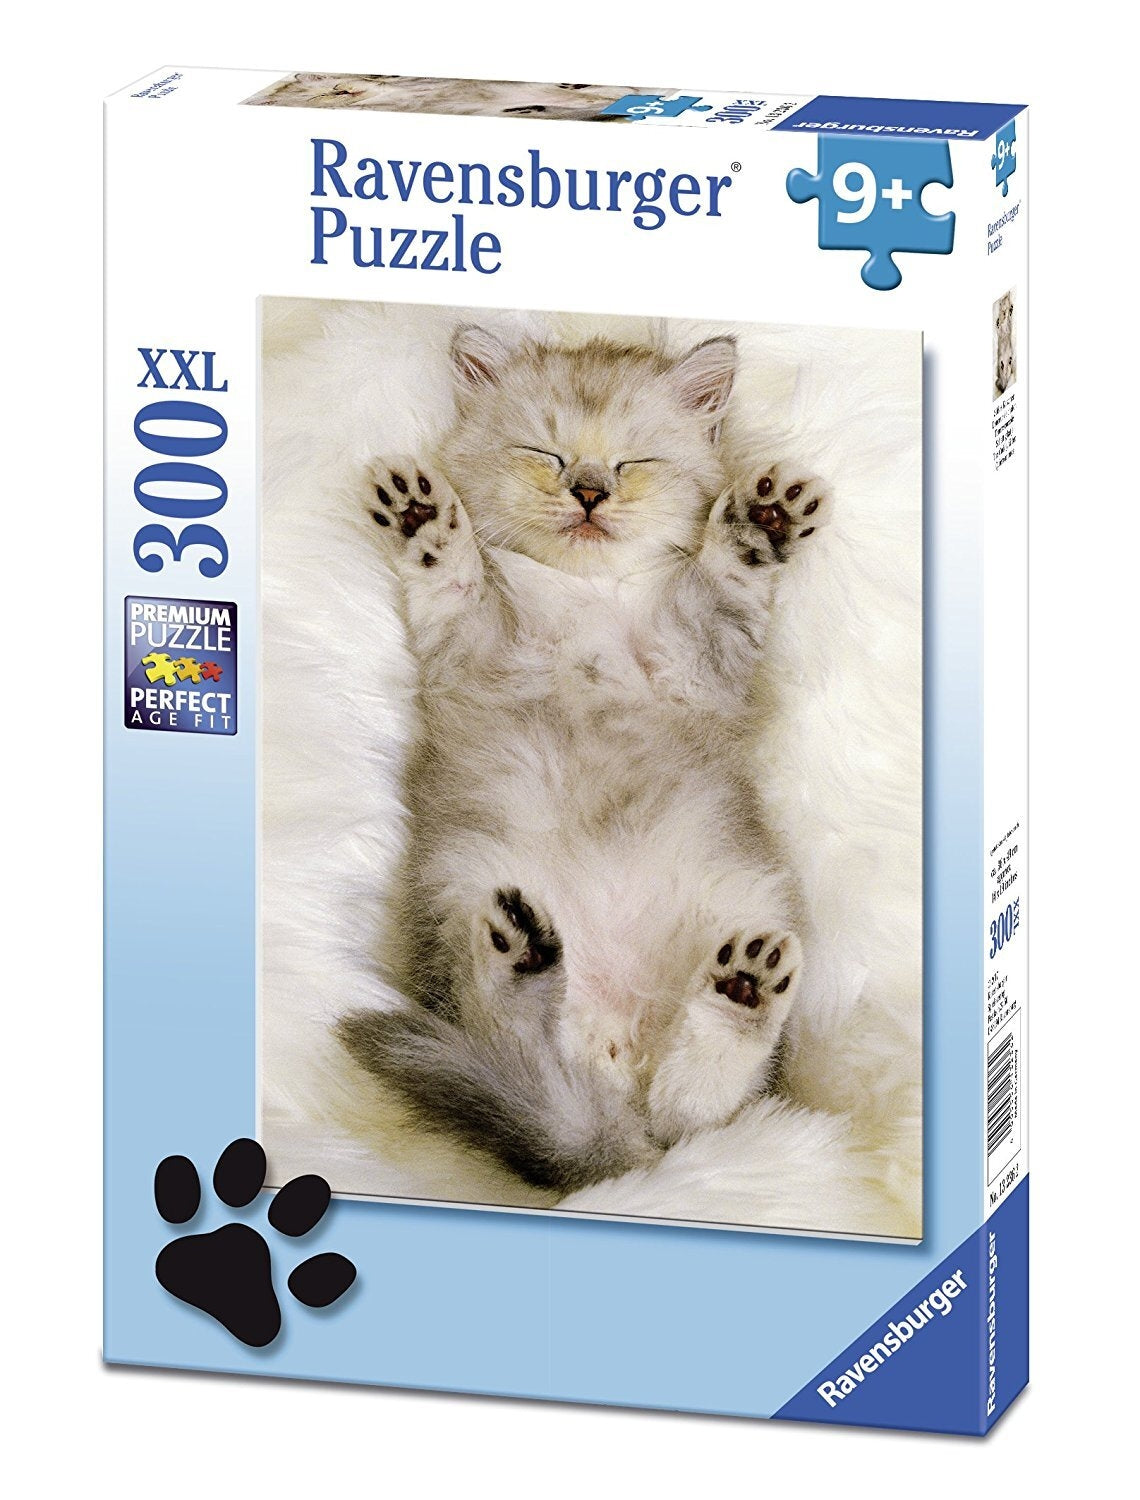 The Cuddly Kitten Puzzle 300Pc